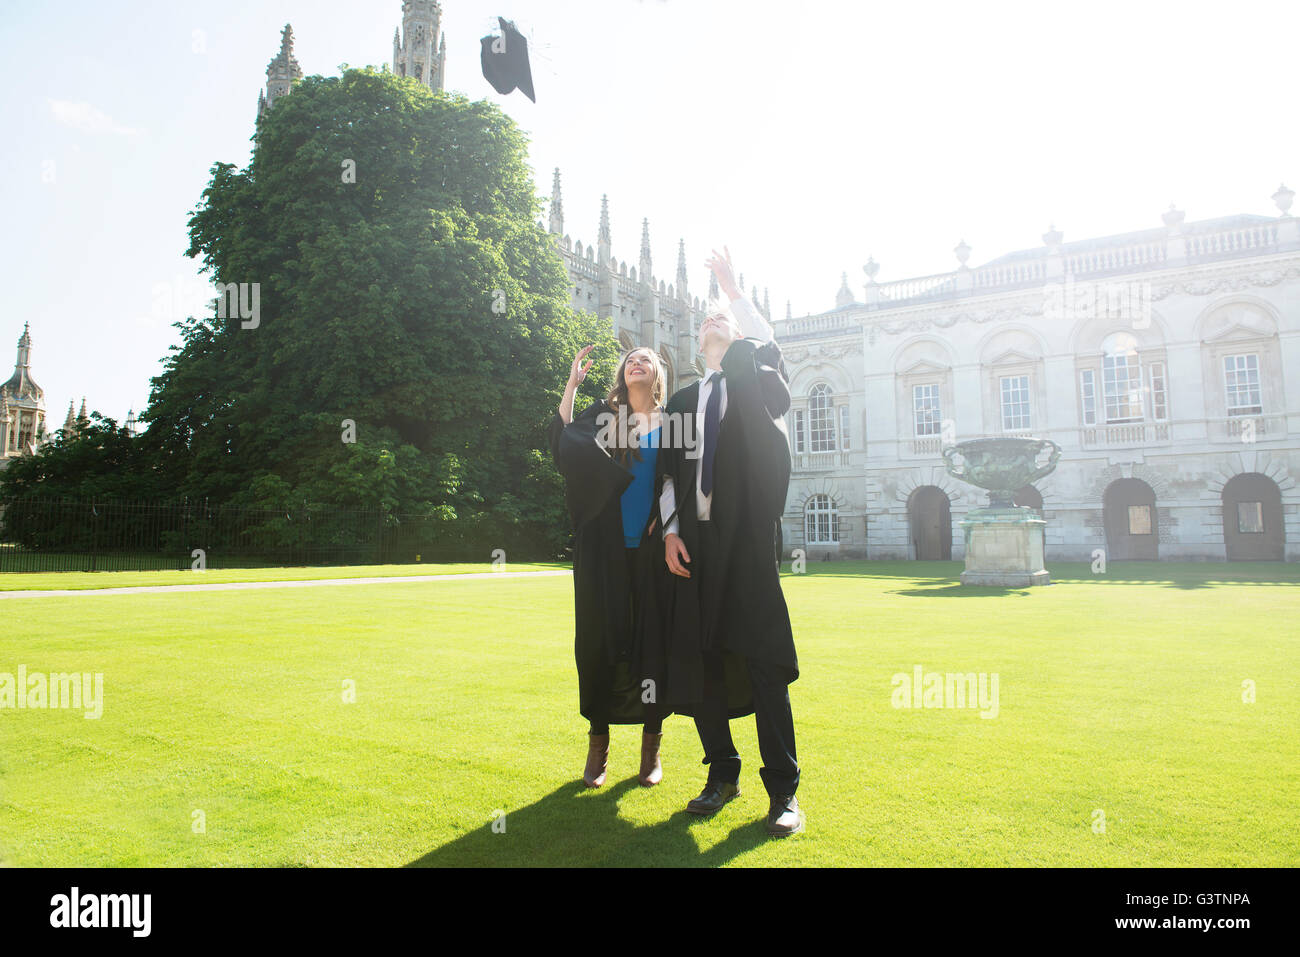 Two young students in graduation gowns throwing mortar boards into the air in celebration in the grounds of Cambridge University Stock Photo